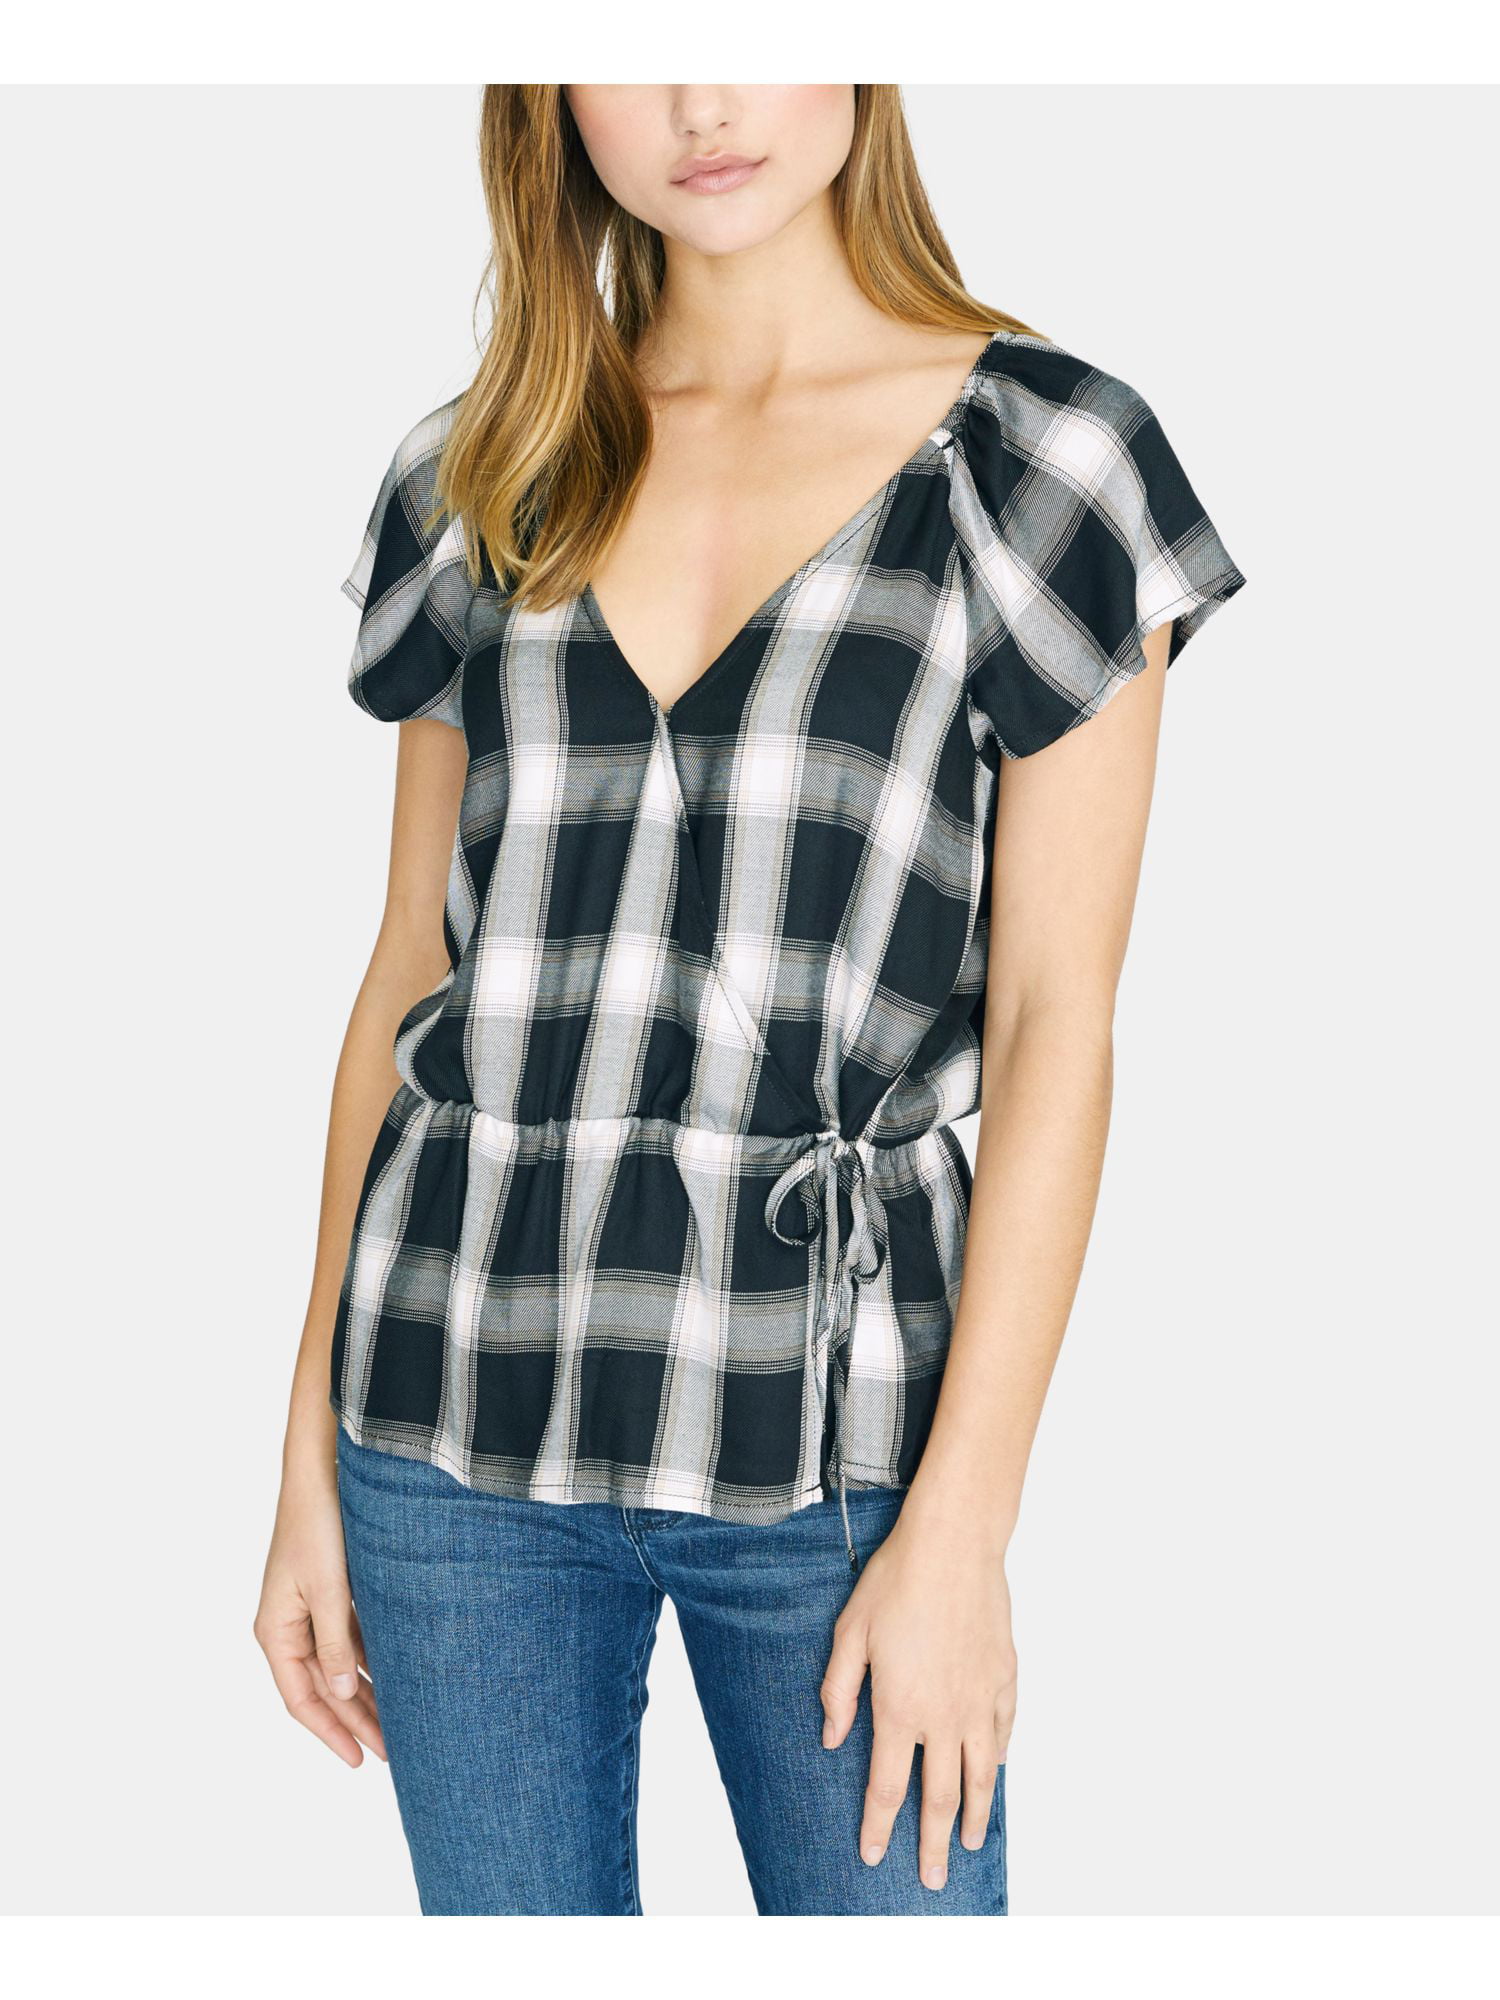 Women's Plaid Wrap Blouse with Ruffle Sleeves